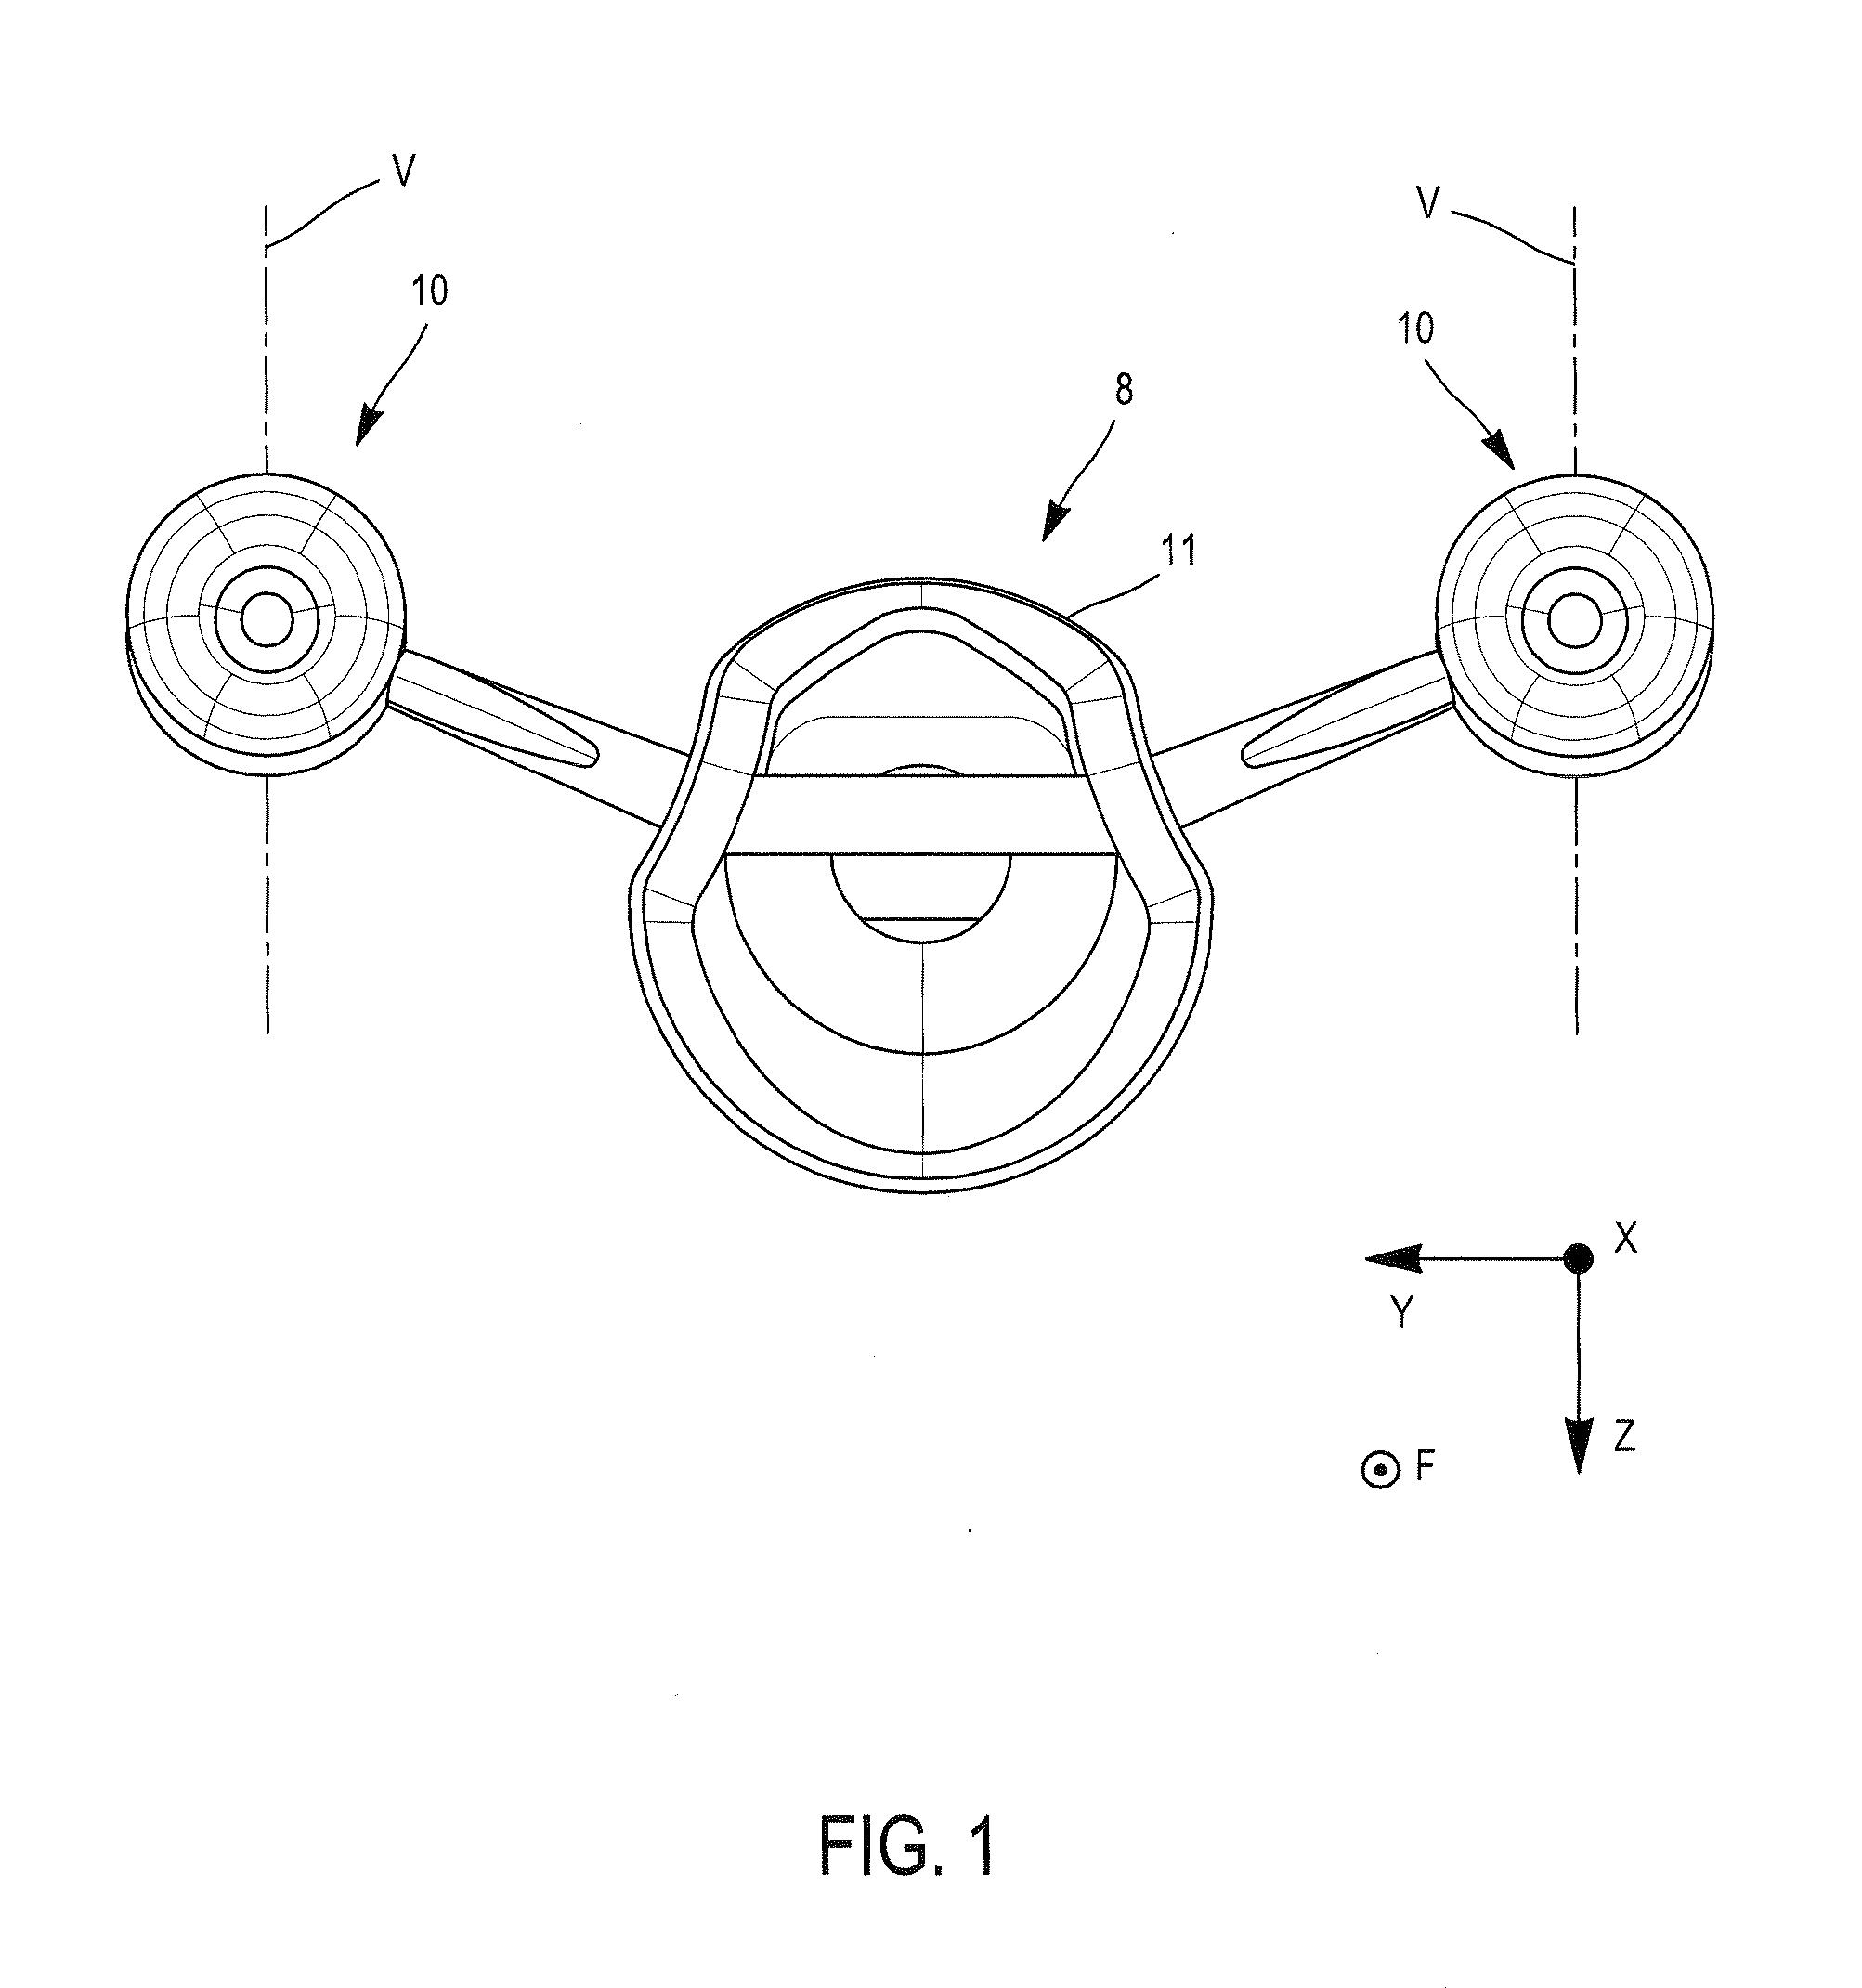 Lateral propulsion unit for aircraft comprising a turbine engine support arch